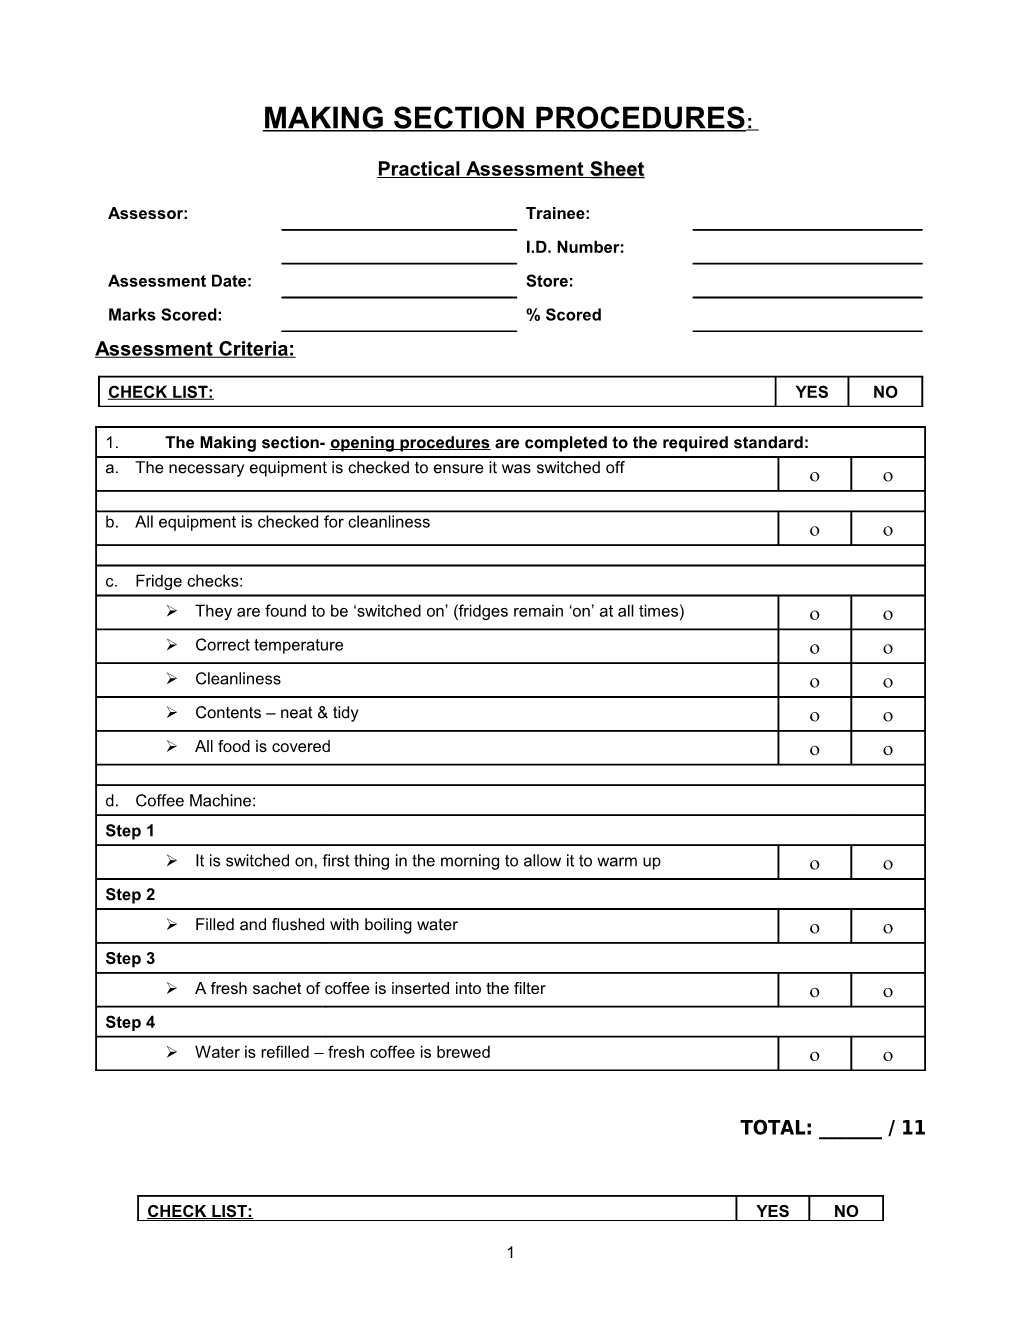 Making Section Procedures: Practical Assessment Sheet